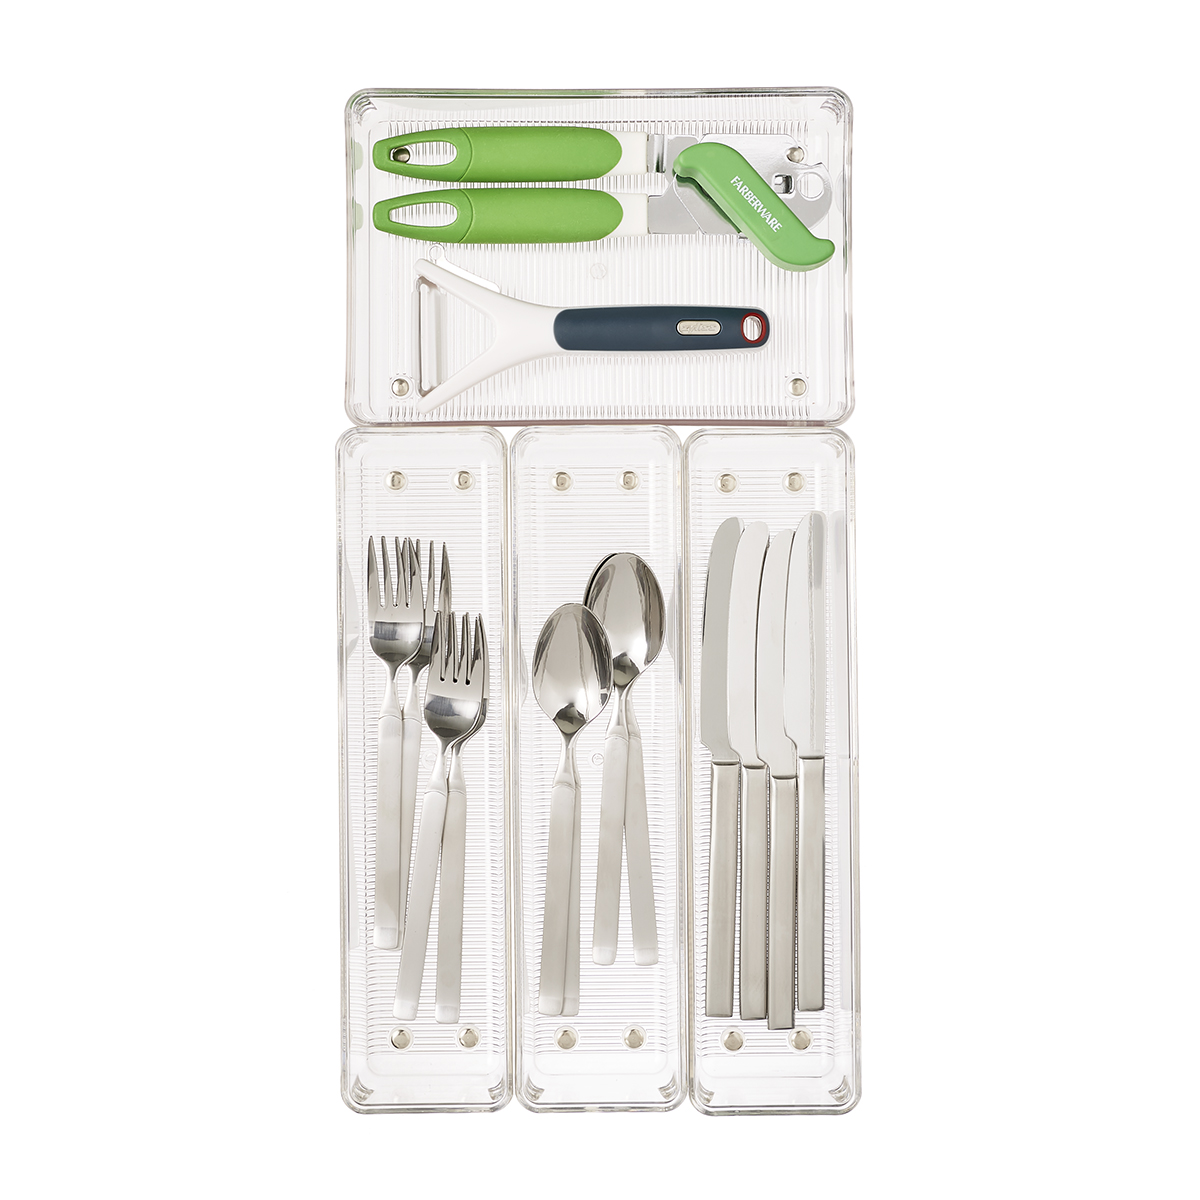 https://www.containerstore.com/catalogimages/370010/VIS-linus-shallow-drawer-organizers-.jpg